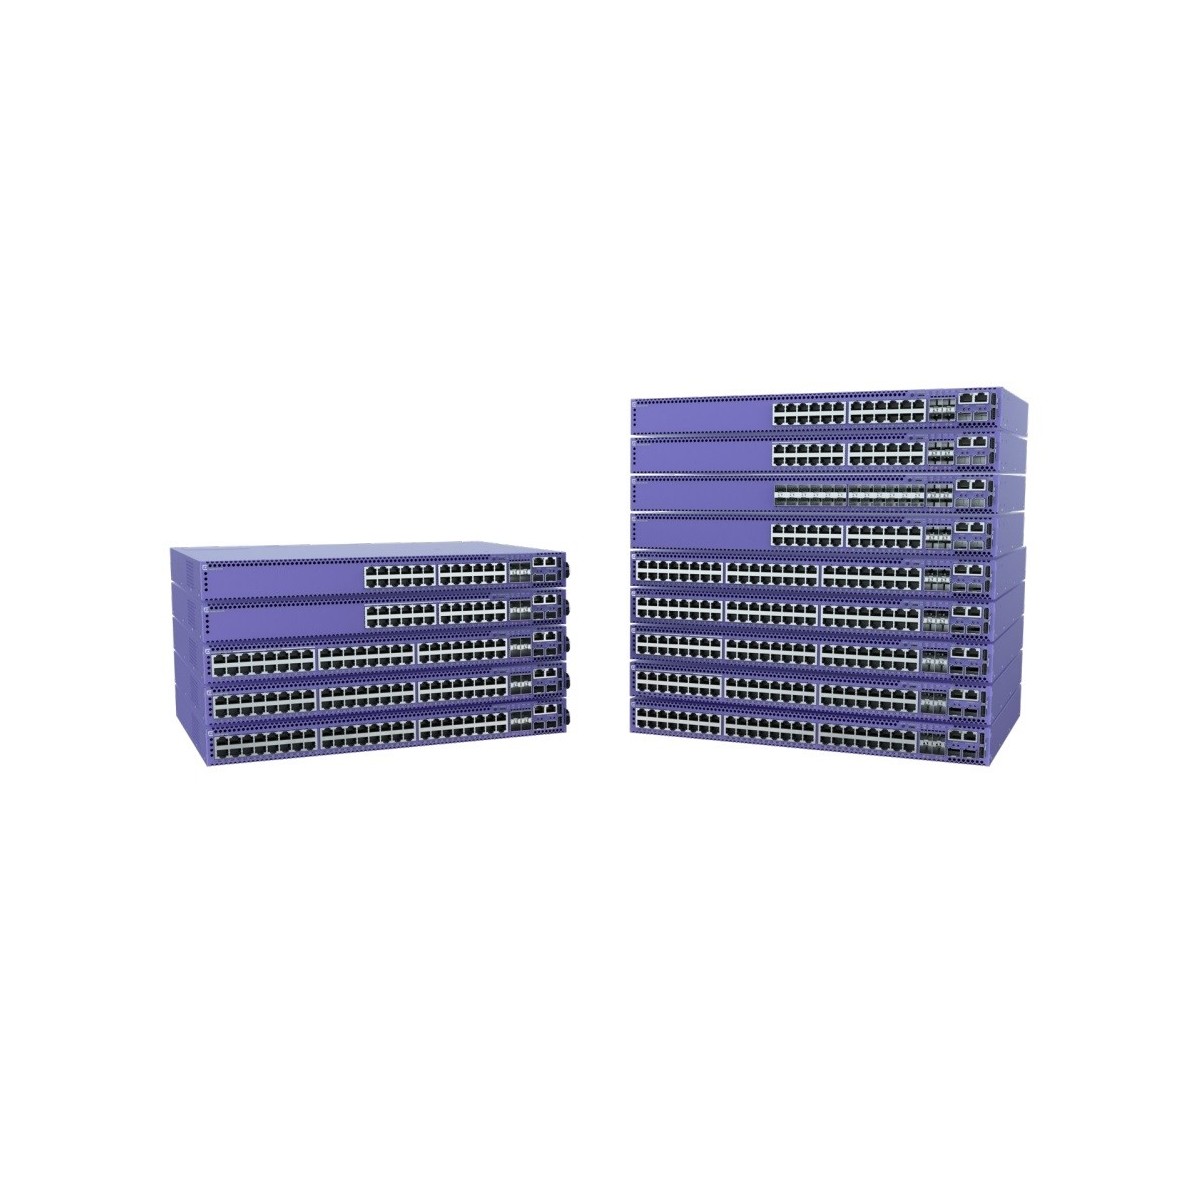 Extreme Networks ExtremeSwitching 5420M 48 - Switch - 1 Gbps